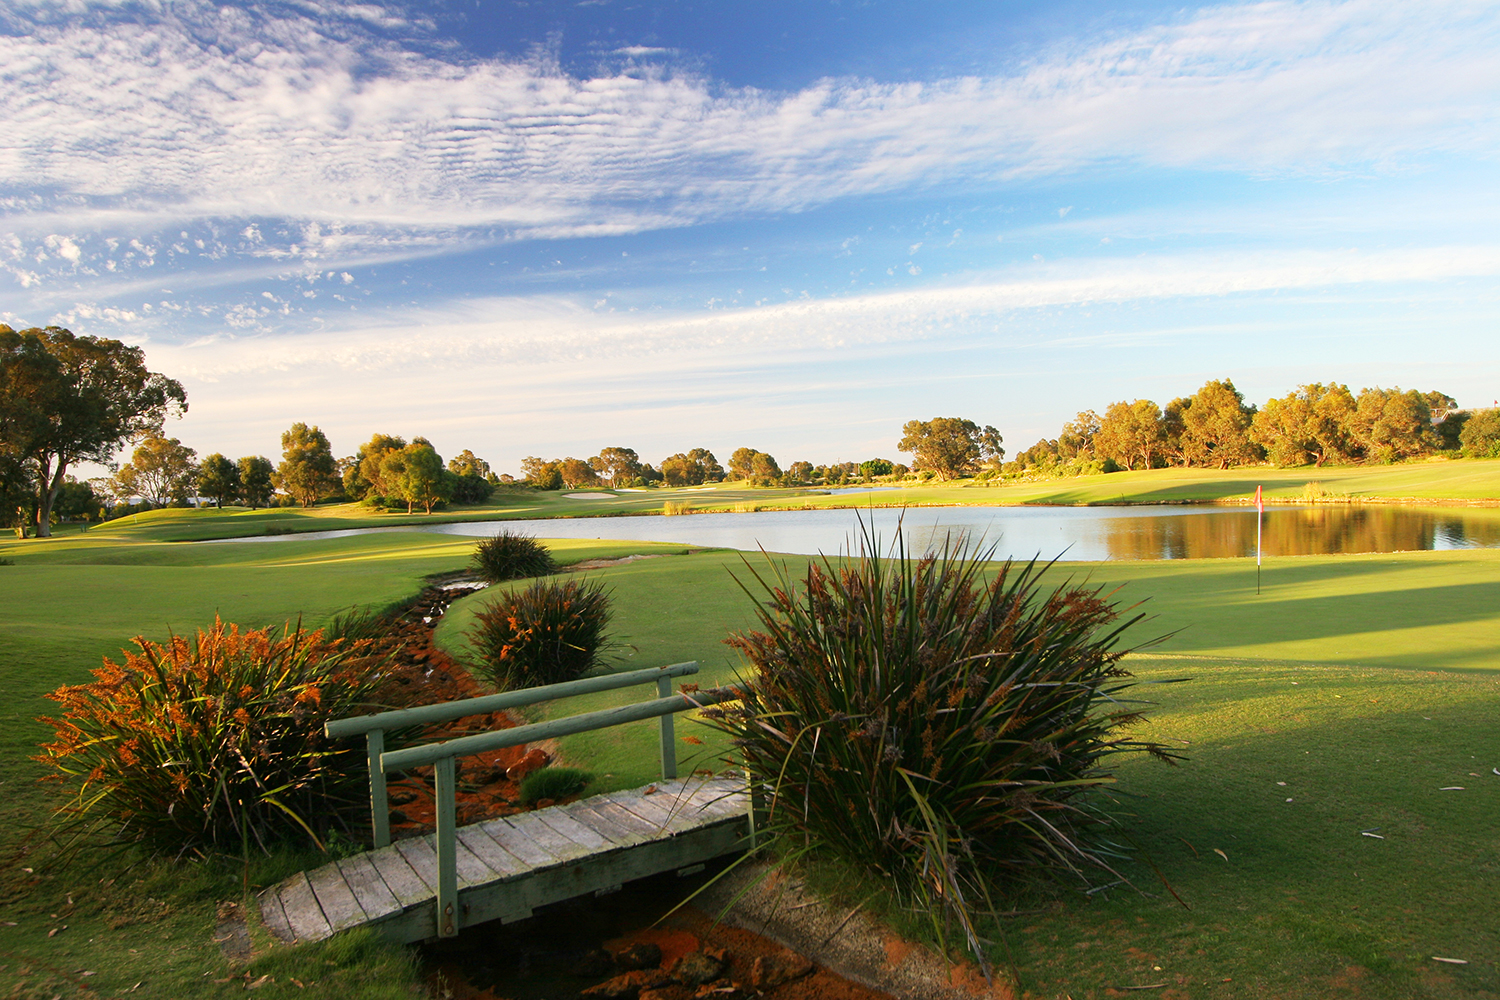 Meadow Springs Golf and Country Club is one of four outstanding courses 45 minutes south of Perth.